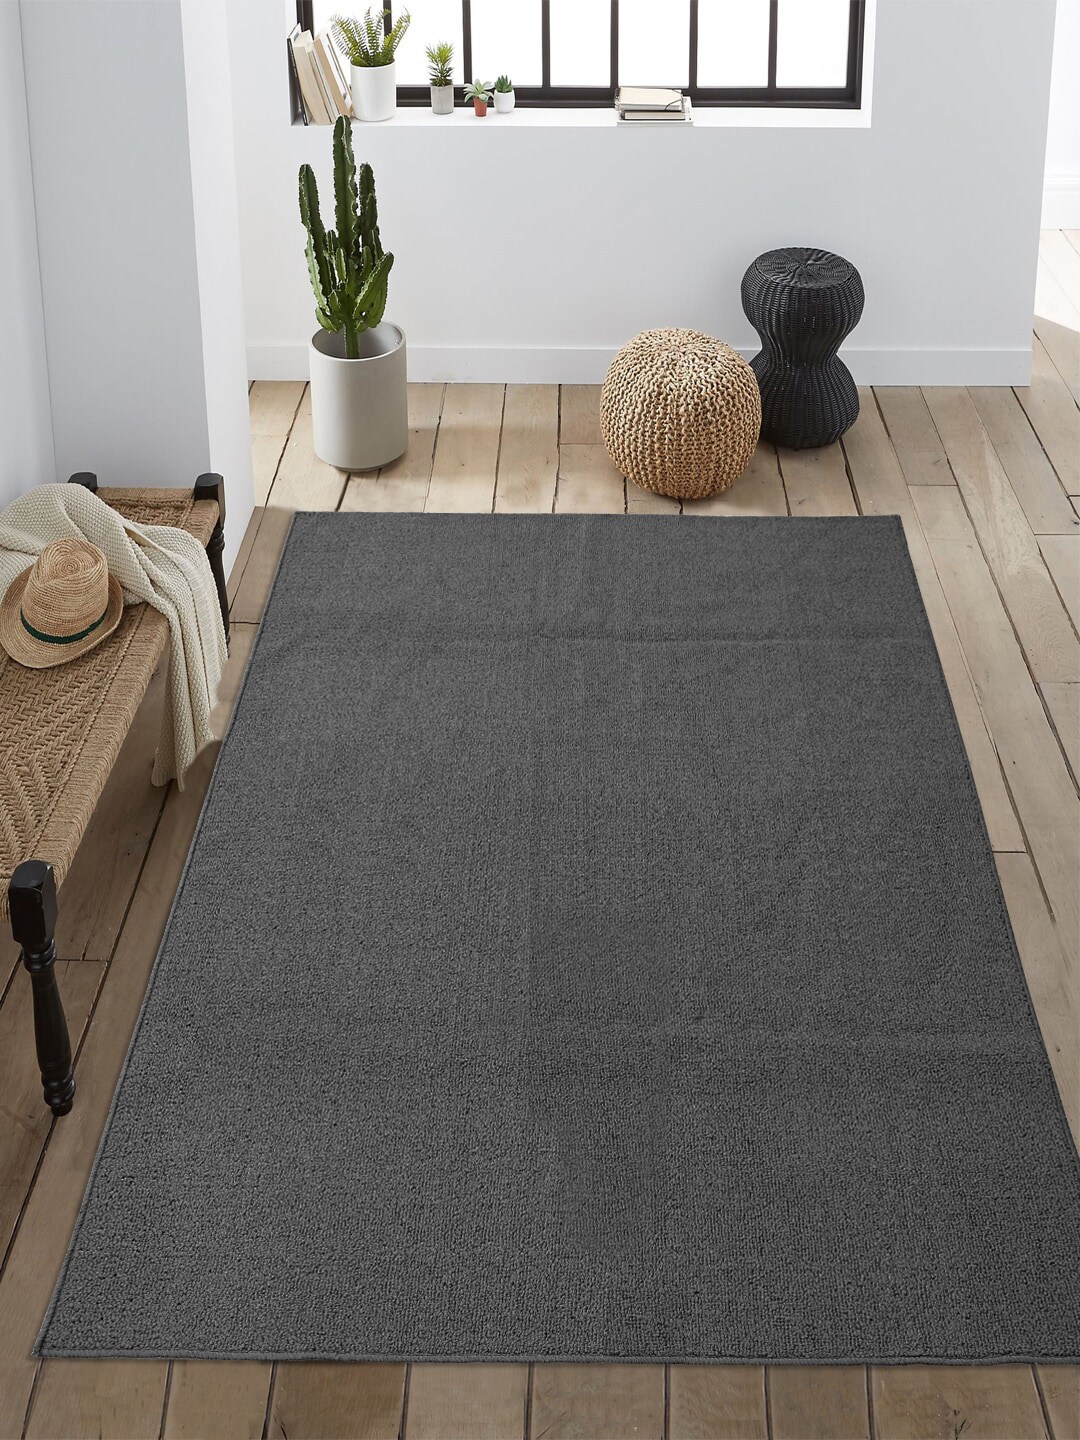 Saral Home Grey Solid Modern Carpet Price in India